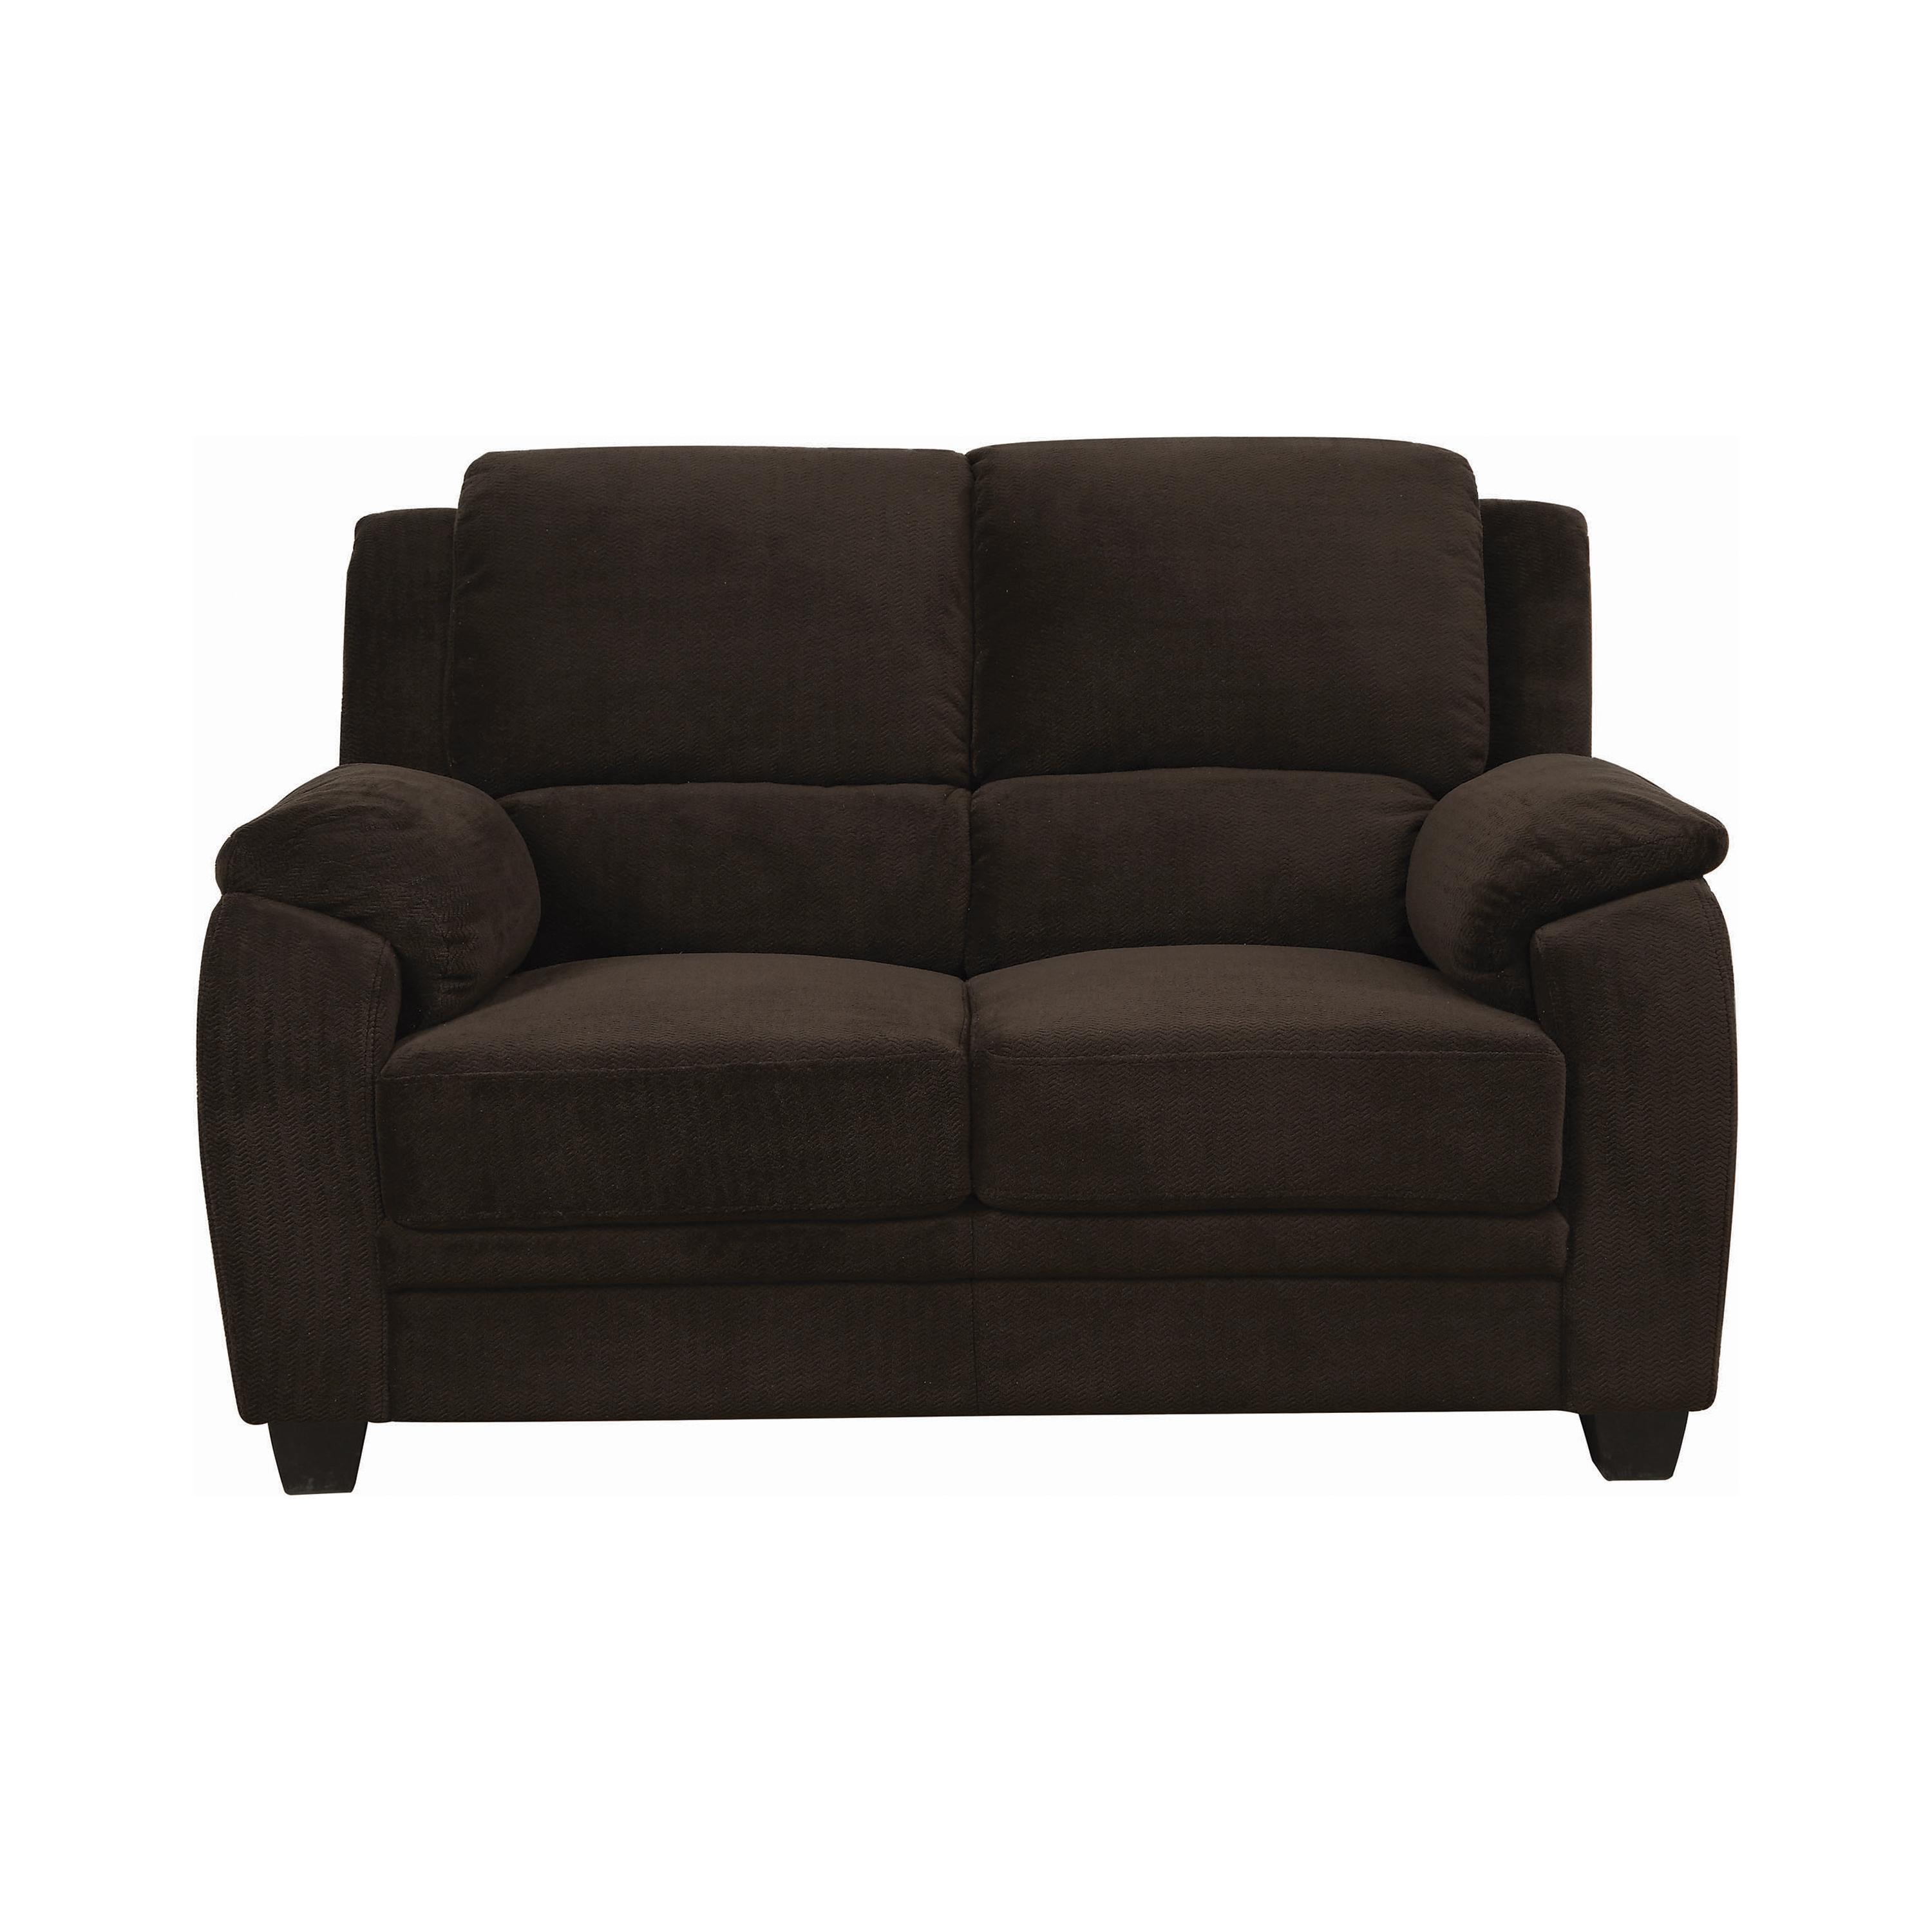 Transitional Loveseat 506245 Northend 506245 in Chocolate 